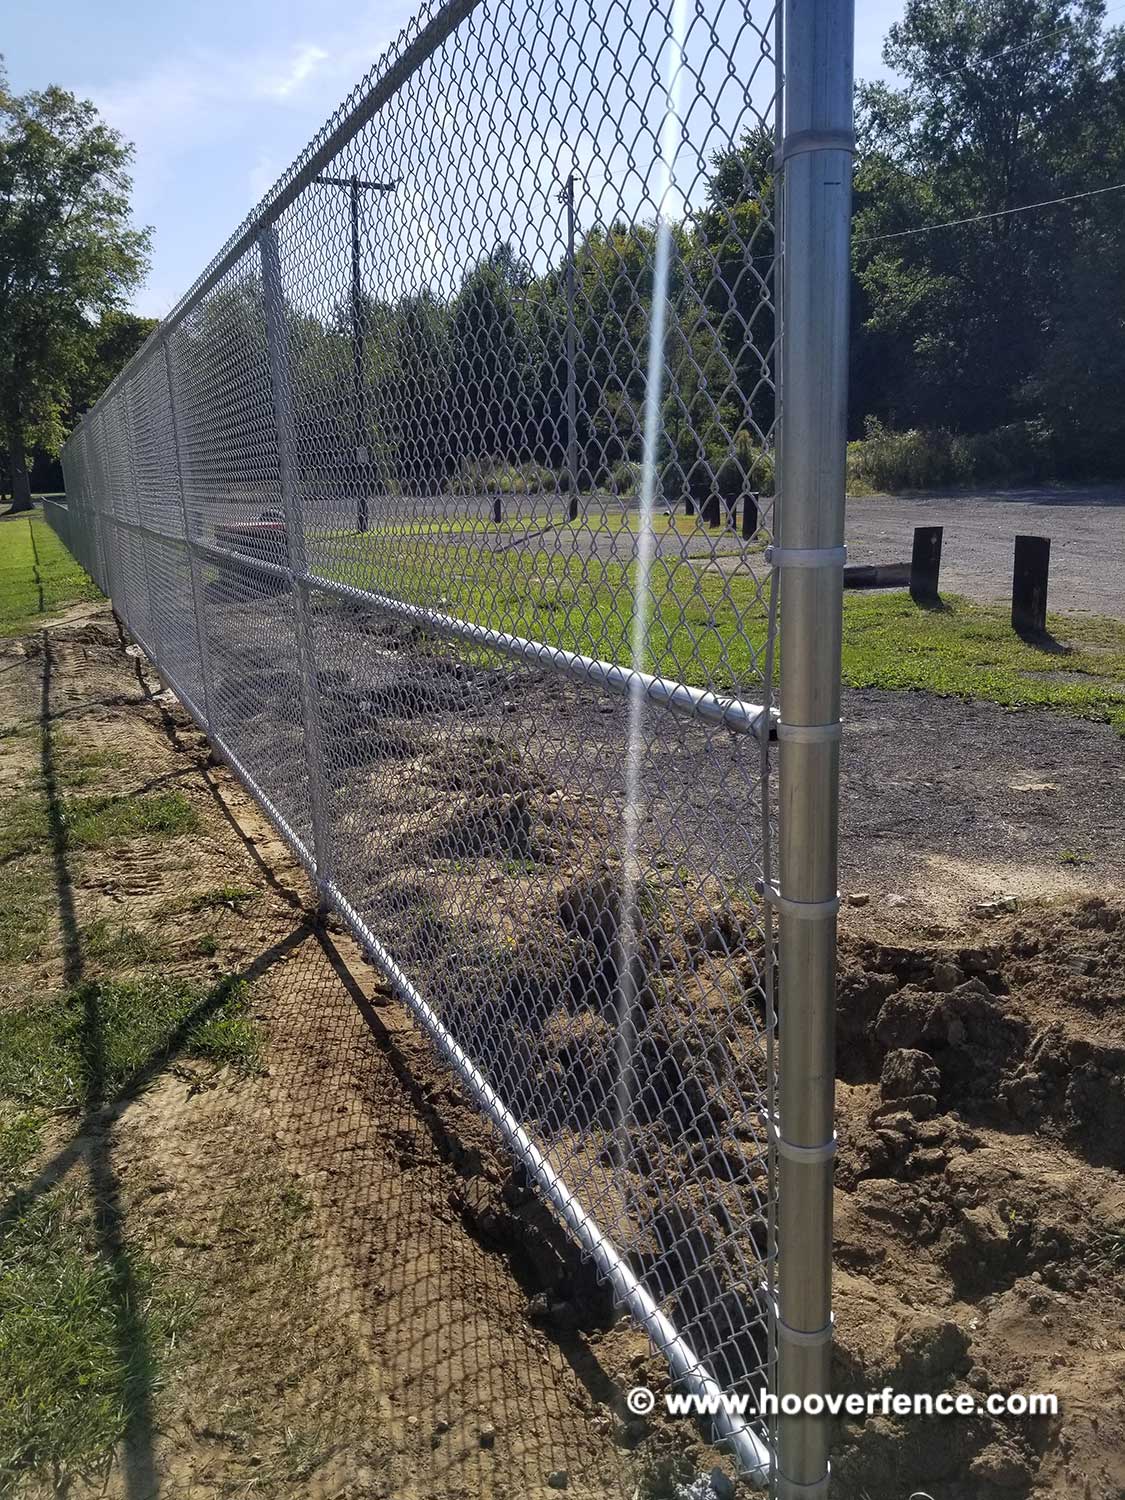 Hoover Fence Co Installation Baseball Sideline Fence - Field 4 - Newton Falls, OH